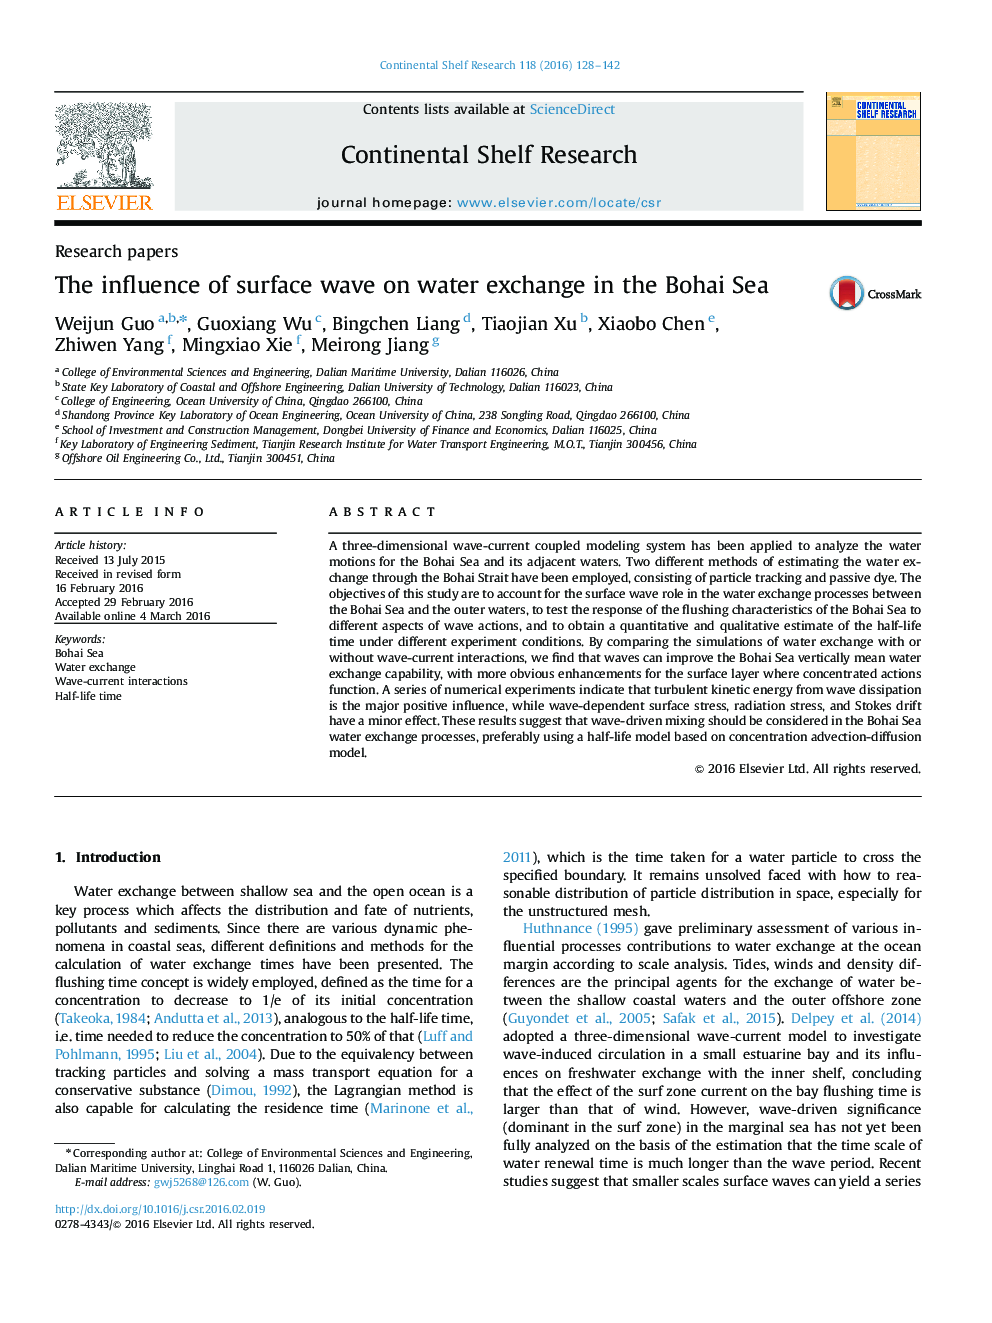 The influence of surface wave on water exchange in the Bohai Sea